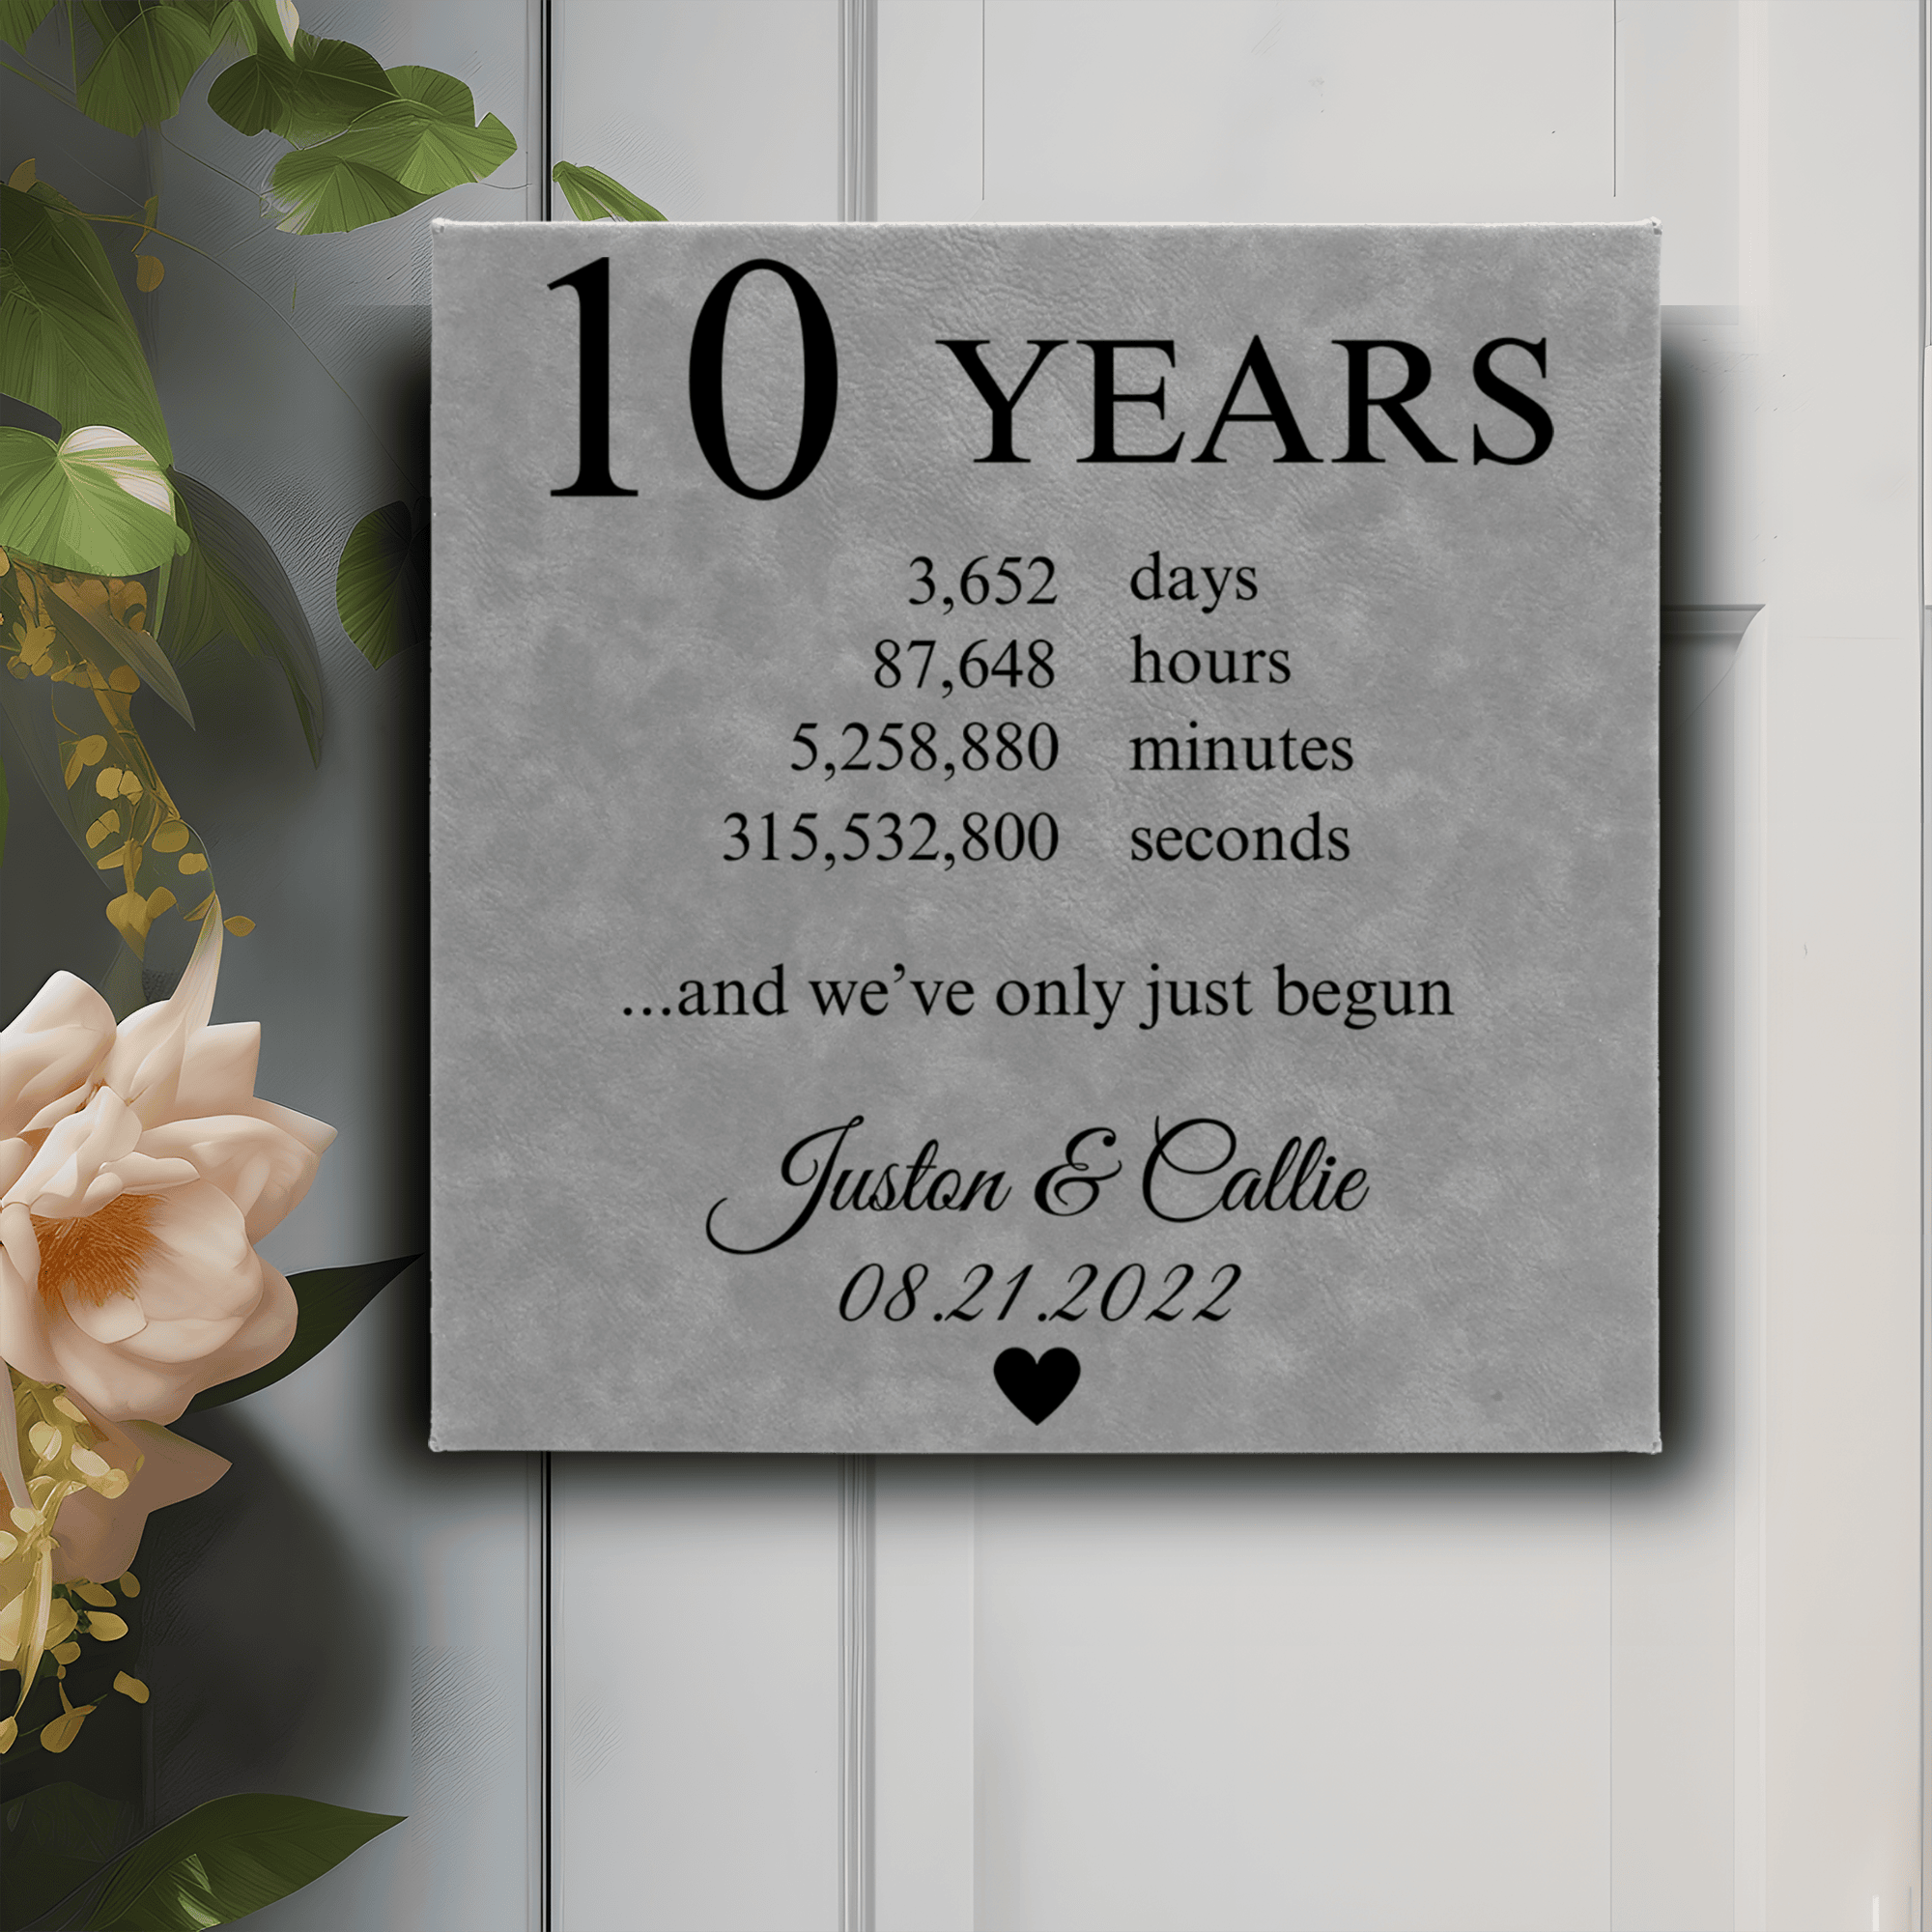 Grey Leather Wall Decor With 10 Year Anniversary Design